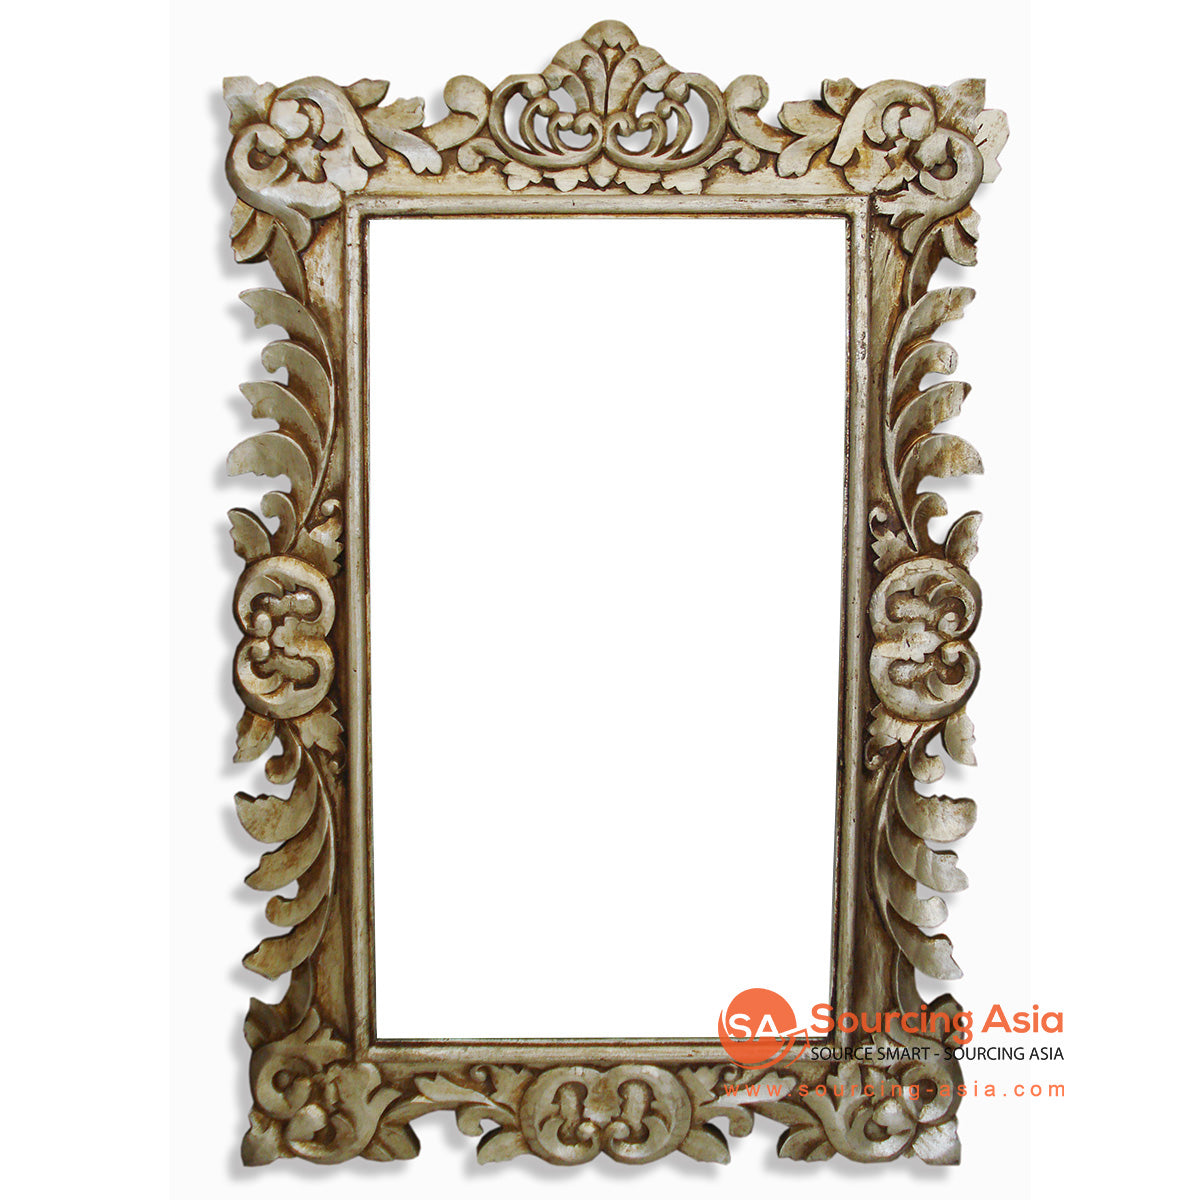 SSU002-SA SILVER ANTIQUE WOODEN MIRROR WITH CARVINGS